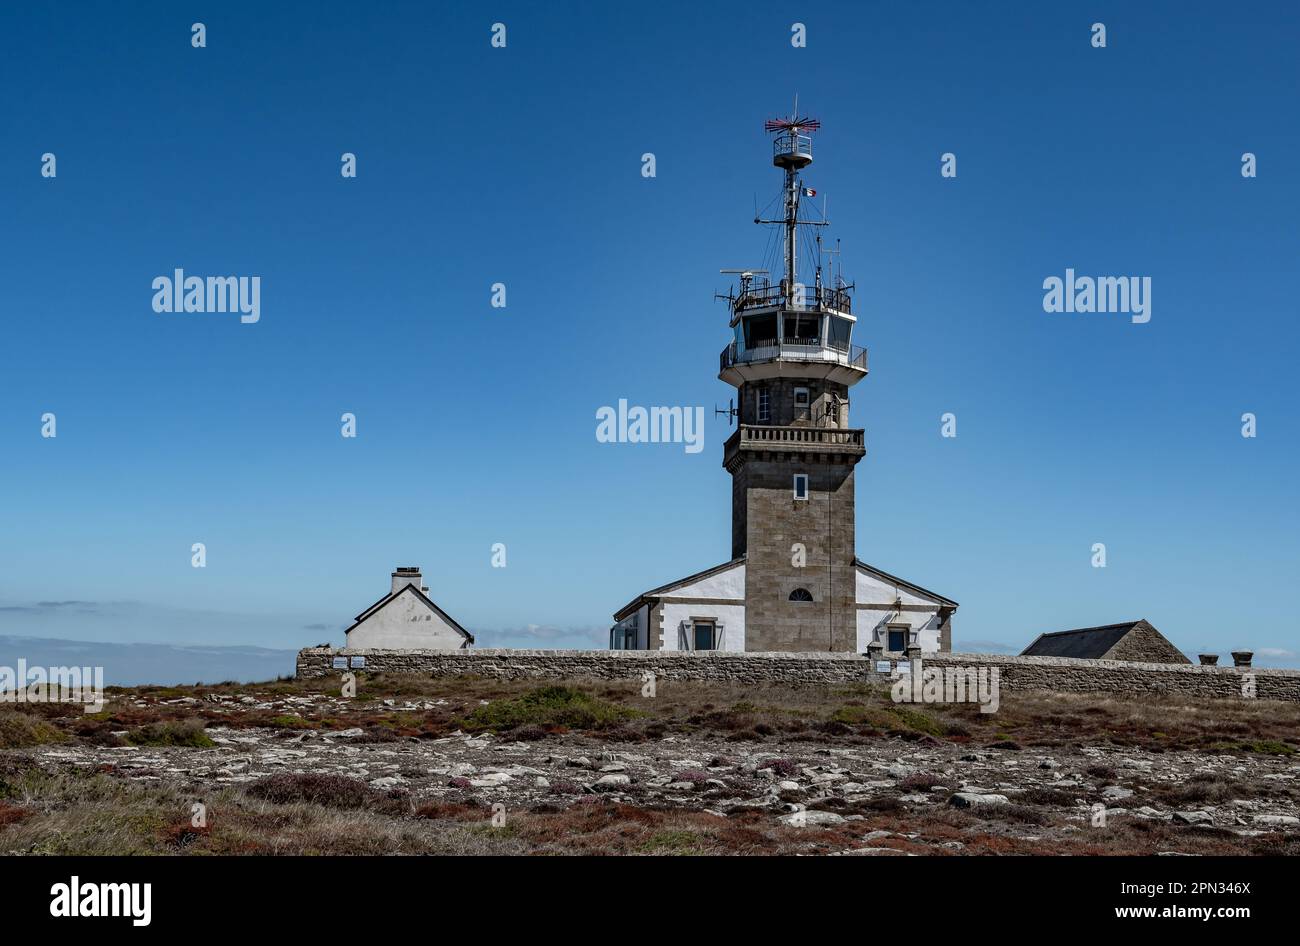 Lighthouse At Peninsula Pointe Du Raz At The Finistere Atlantic Coast In Brittany, France Stock Photo